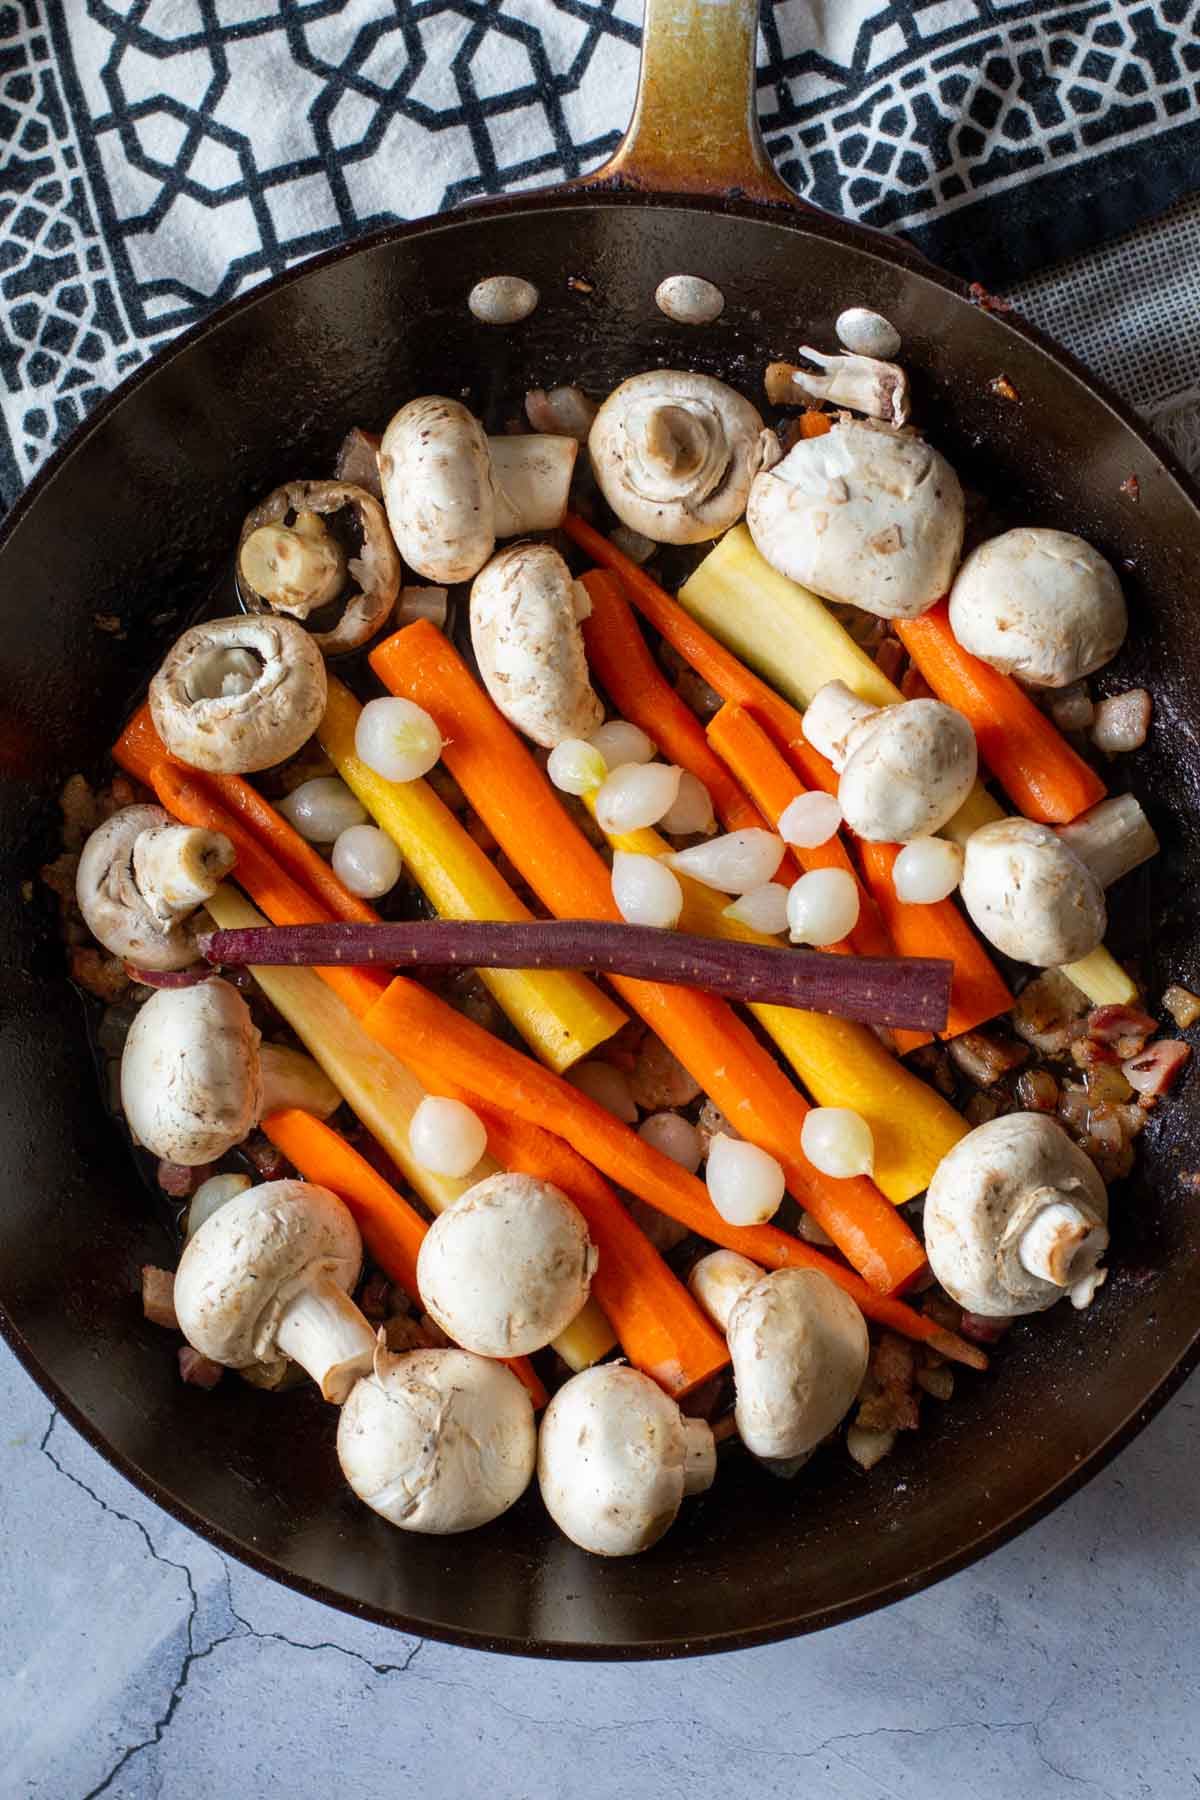 Carrots and mushrooms in a fry pan to make beef stew.